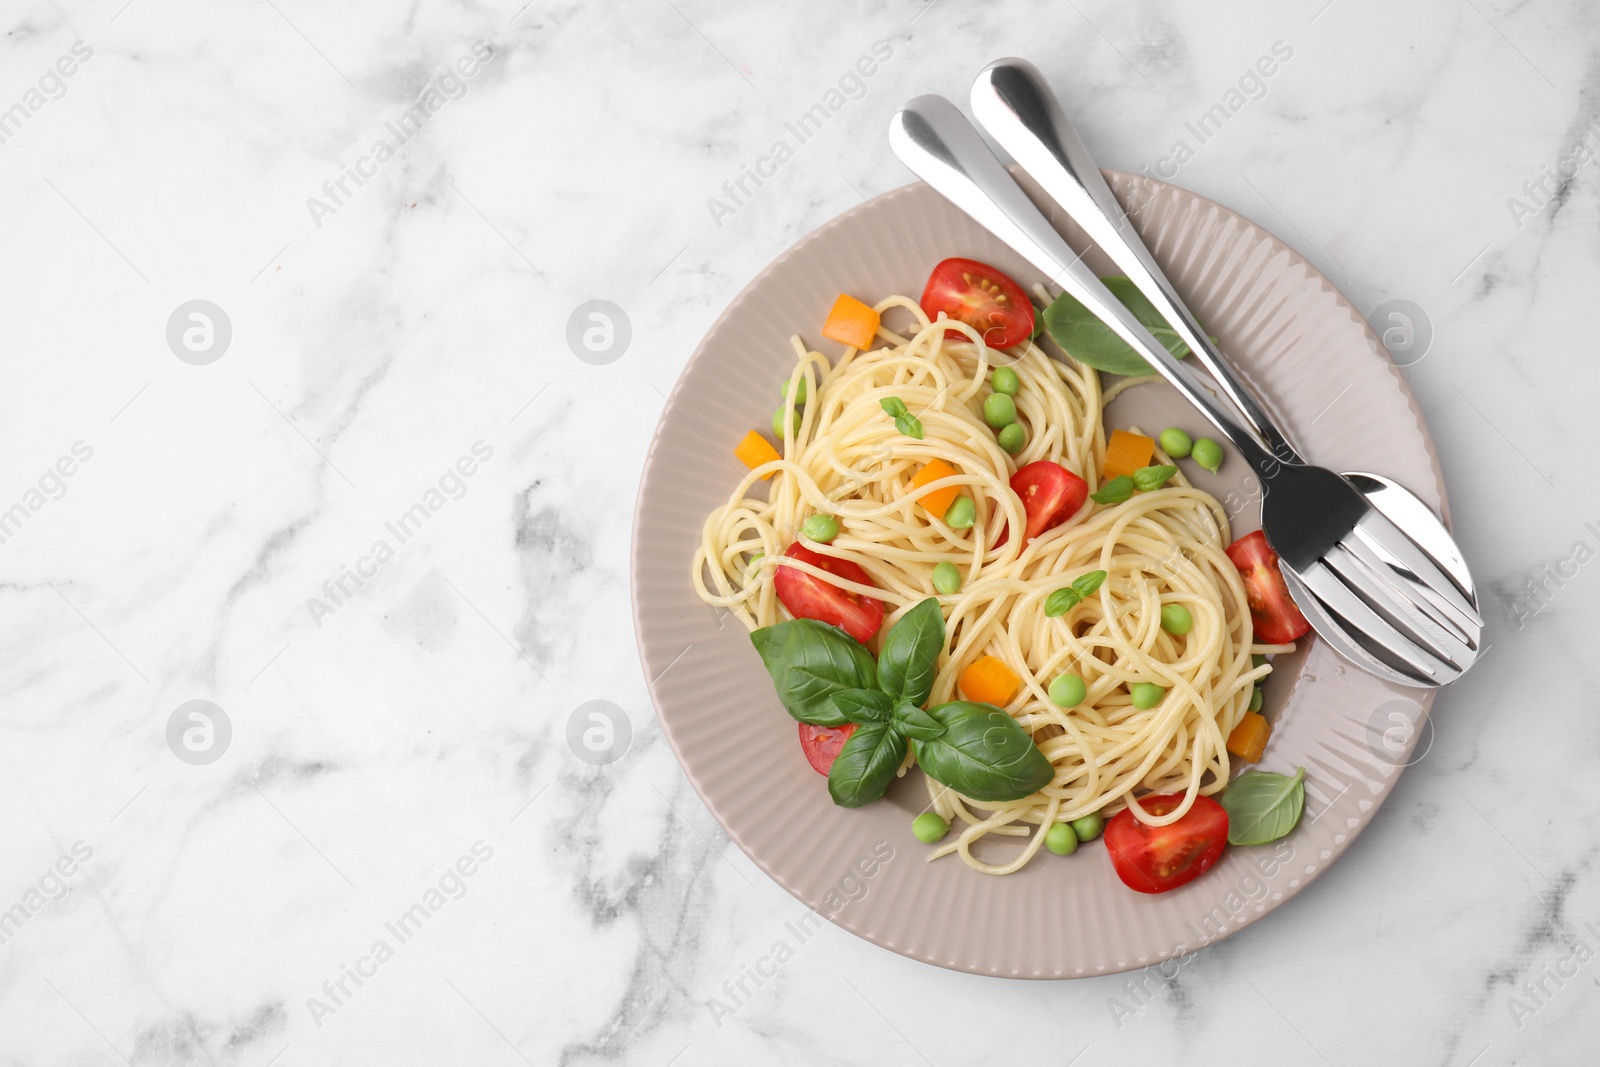 Photo of Plate of delicious pasta primavera and cutlery on white marble table, top view. Space for text